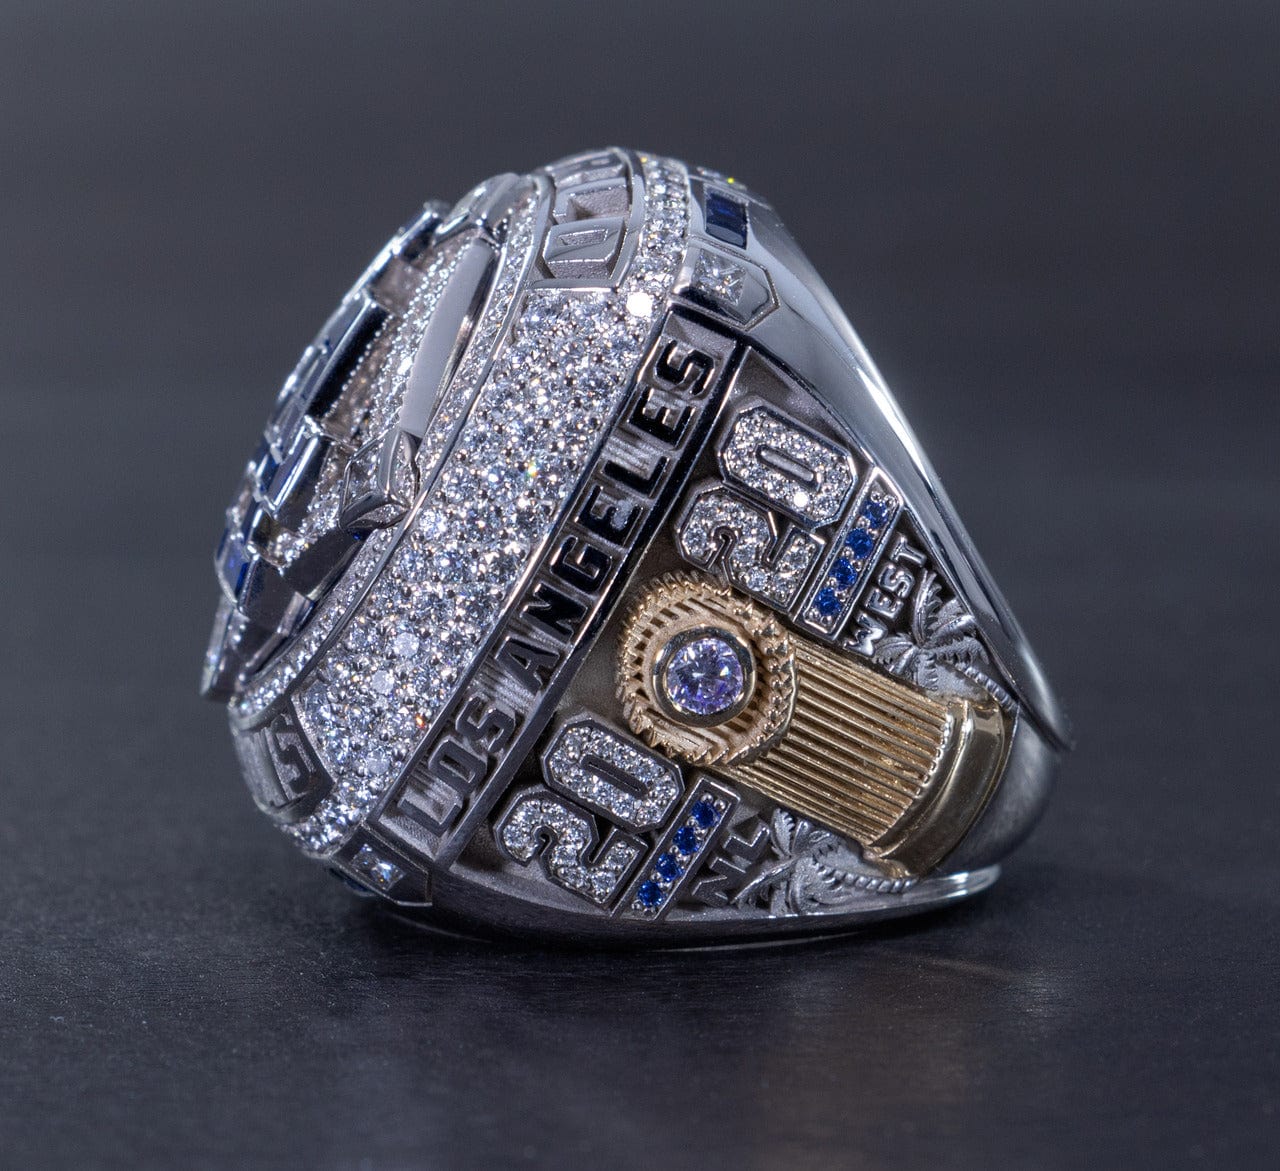 2020 Los Angeles Dodgers Ring